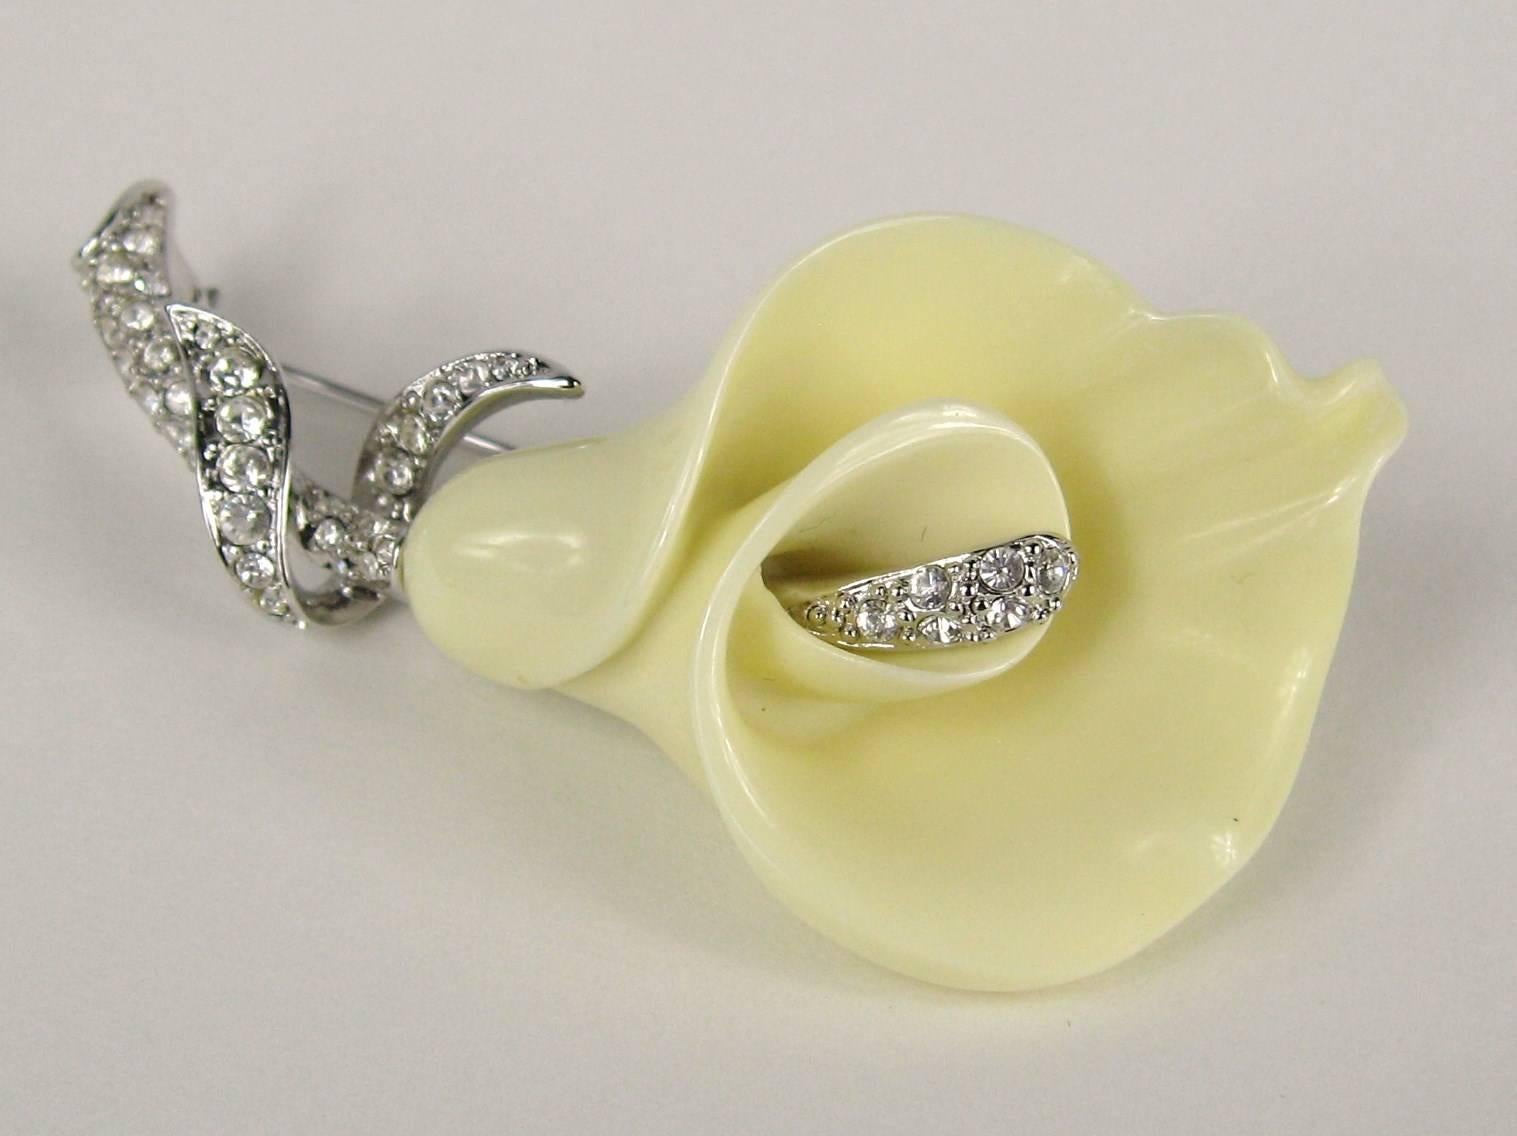 Ivory colored molded Calla Lilly, the lily has a pave crystal stamen and a pave crystal stem and leaves. Measures  2-1/2